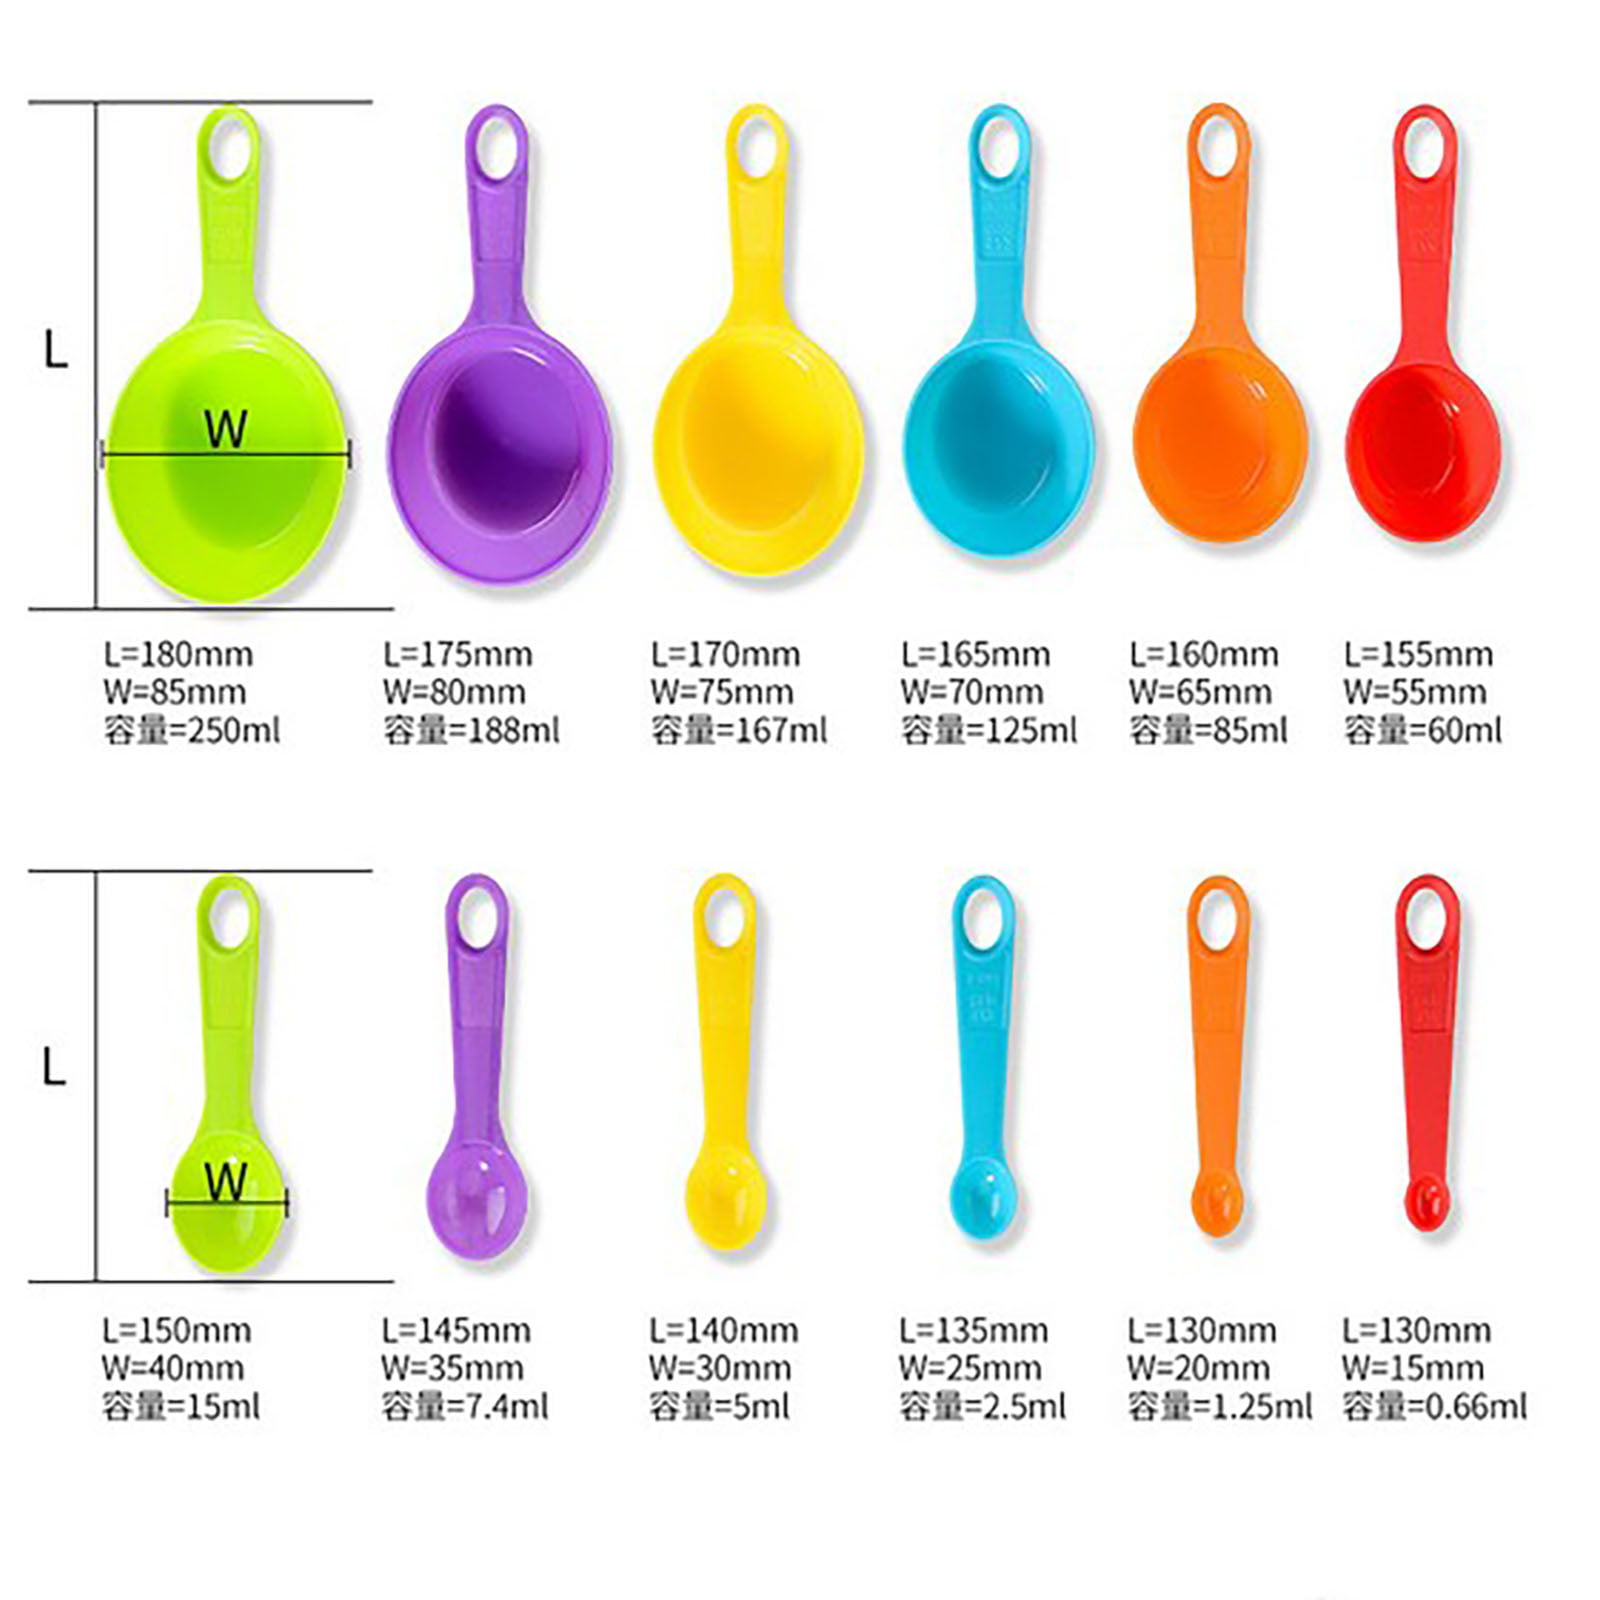  Measuring cups and spoons set of 12, Plastic Colorful Measuring  Cups Meausuring Spoons Stackable for Measuring Dry and Liquid Ingredients  Great for Baking and Cooking(Random Color): Home & Kitchen